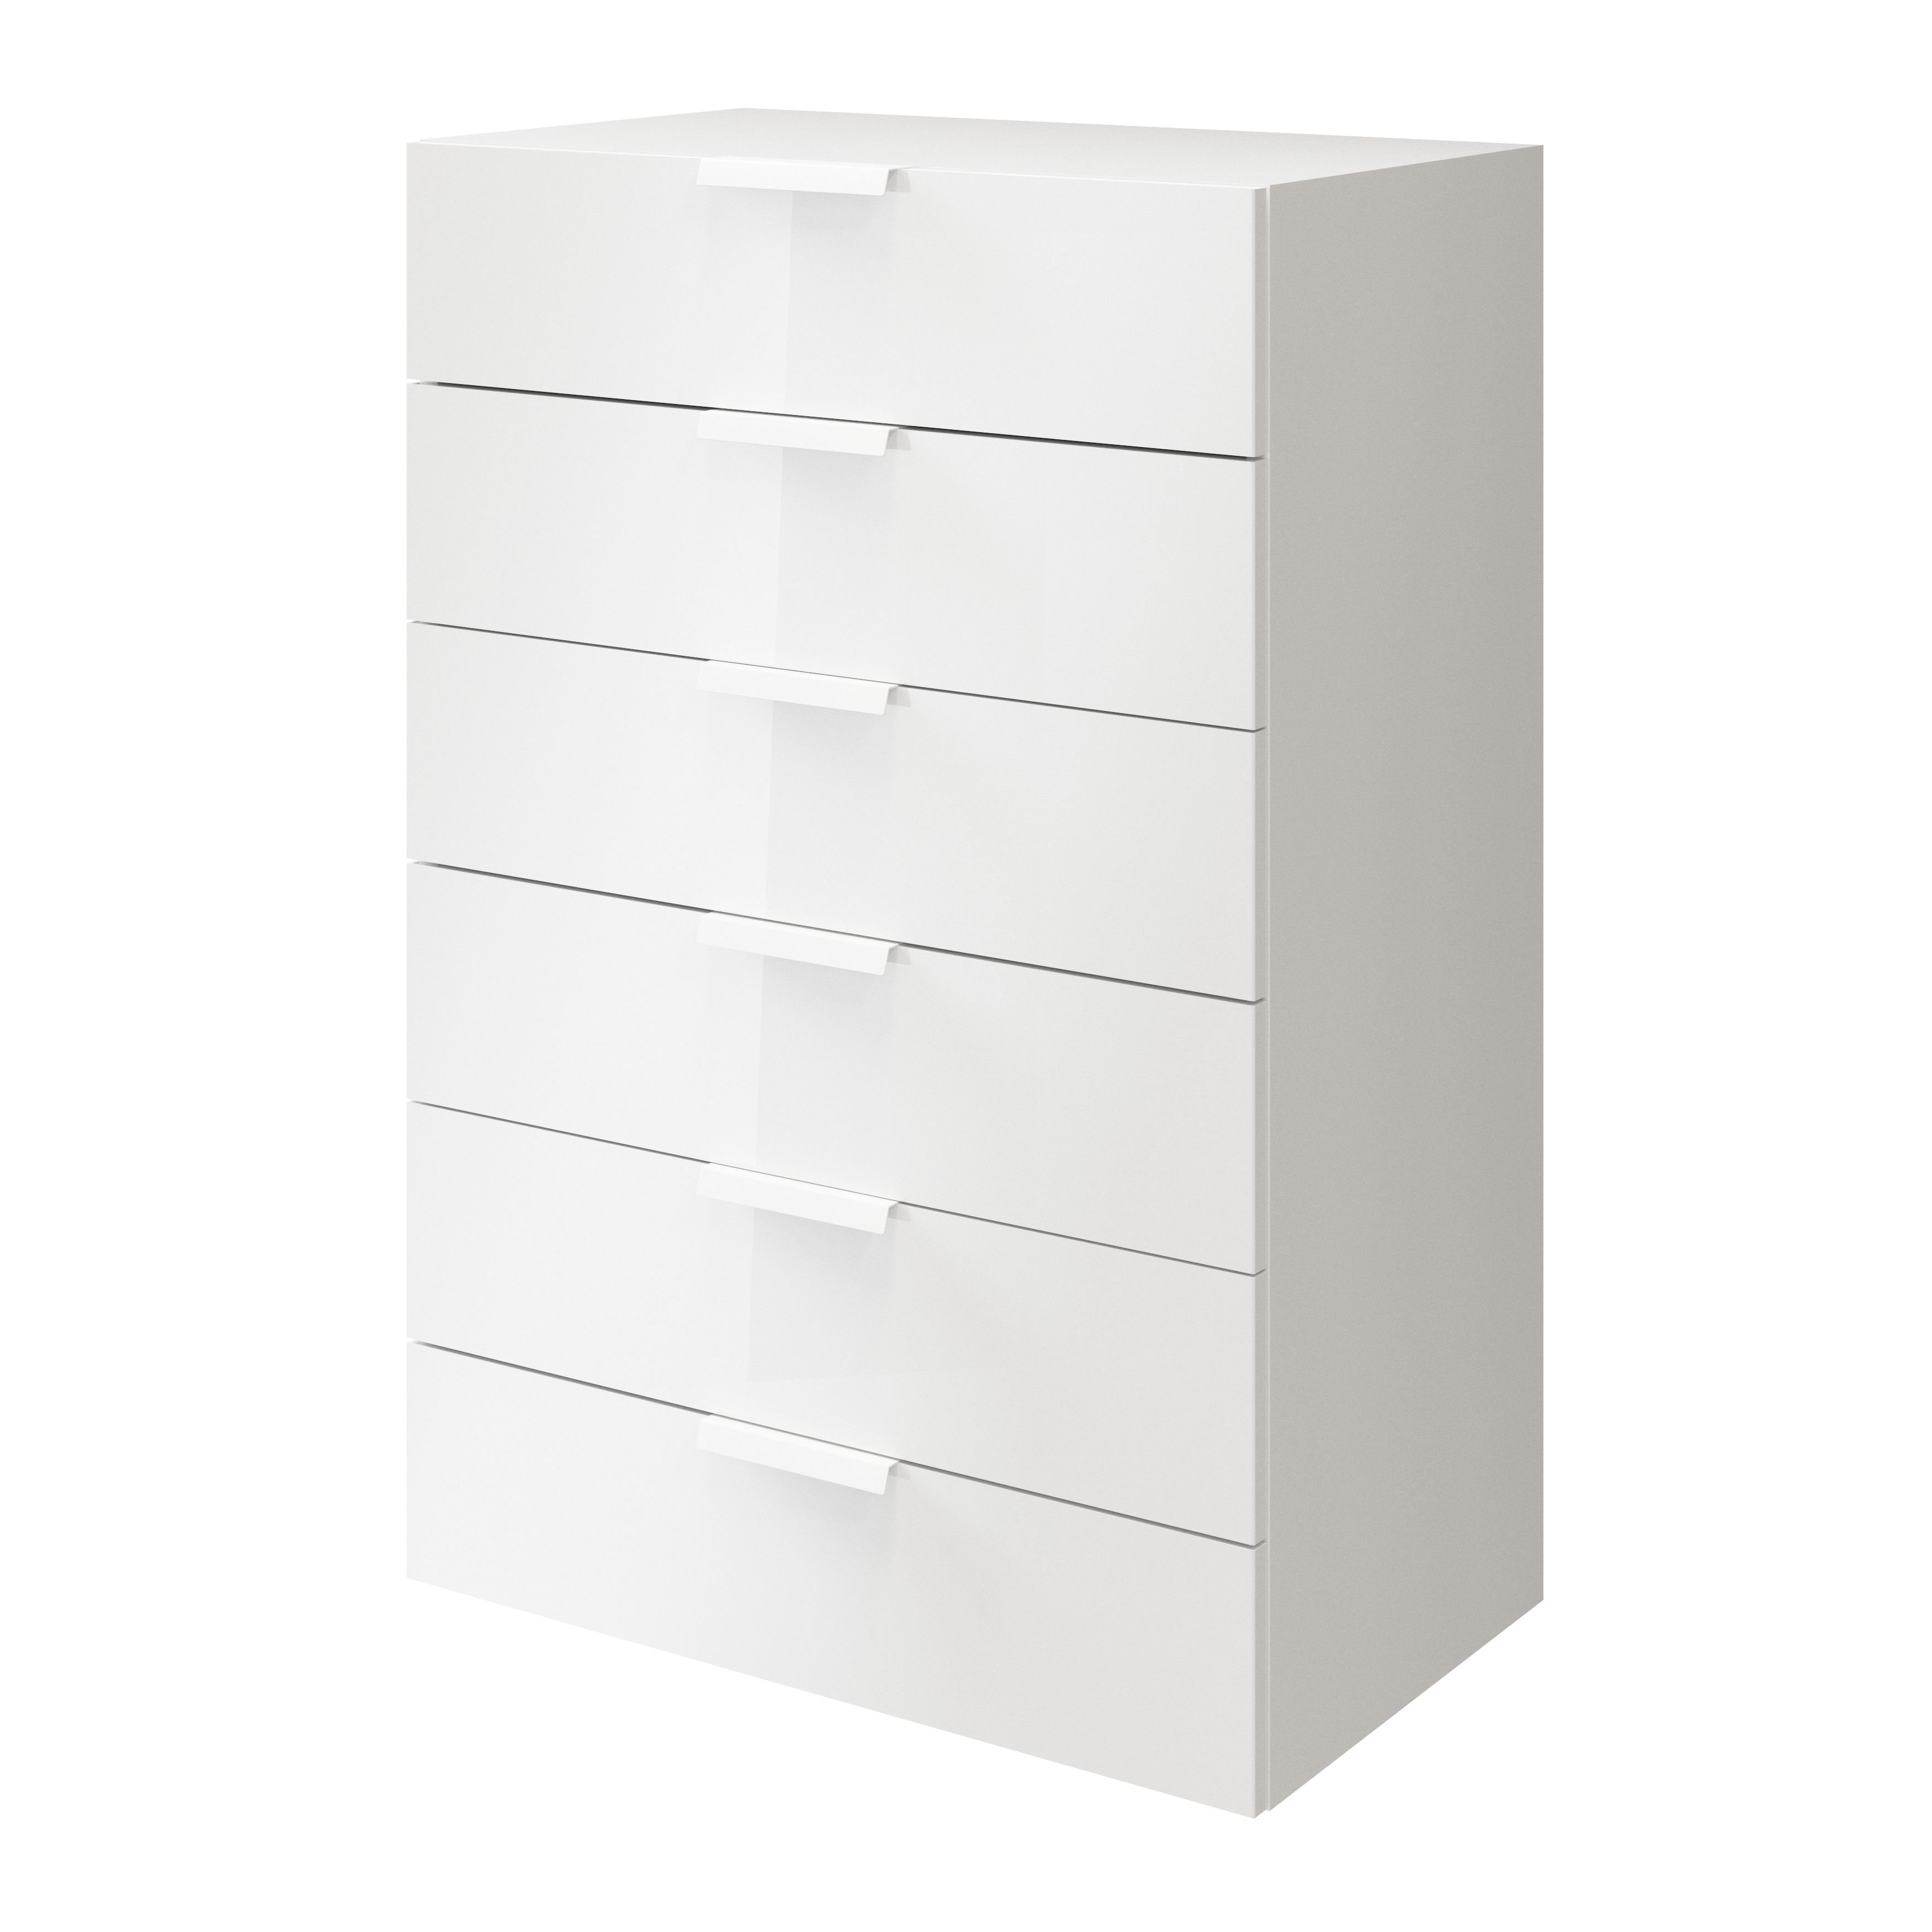 Atomia Freestanding White 6 Drawer Chest of drawers (H)1125mm (W)750mm (D)450mm